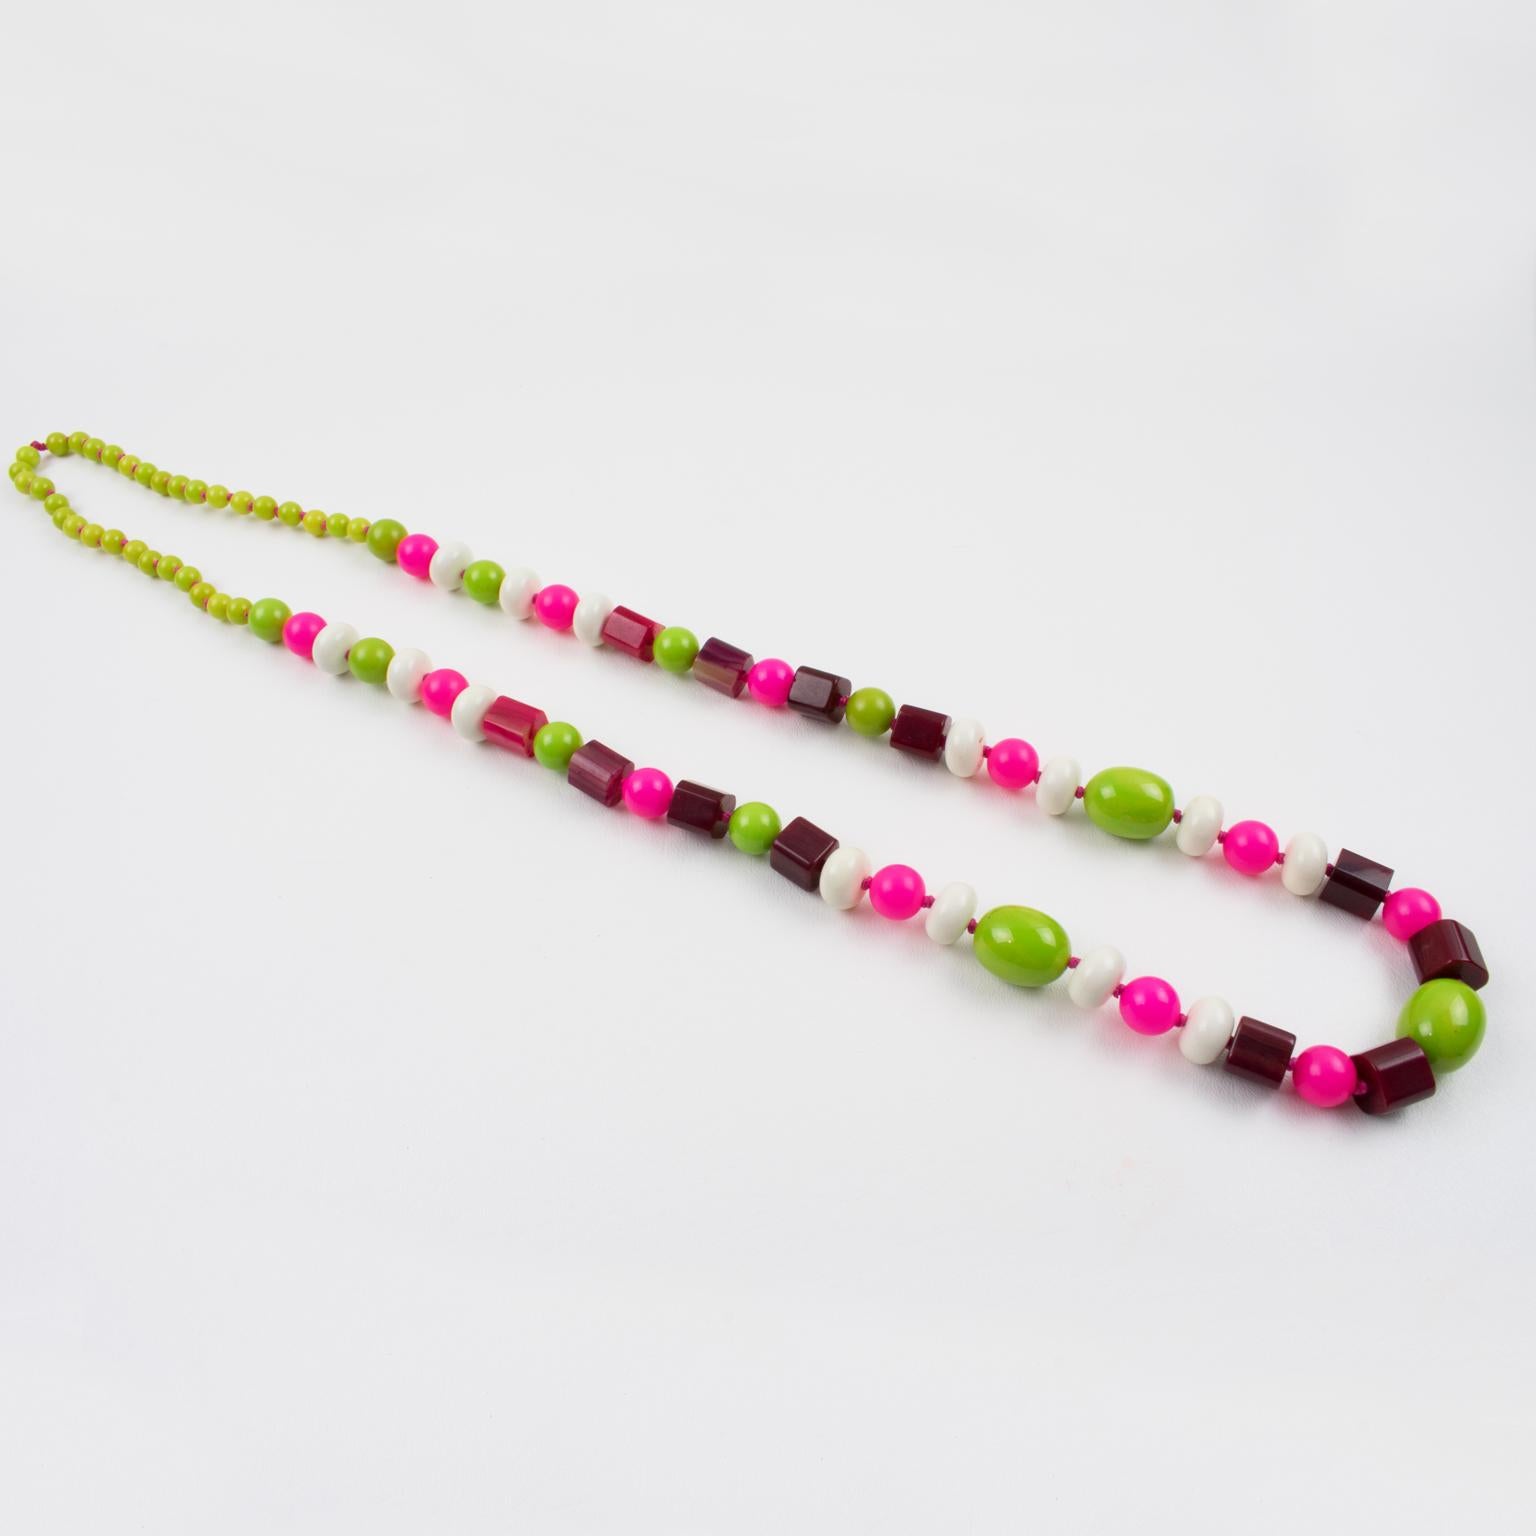 Bakelite and Lucite Long Necklace White, Hot Pink, Apple Green Beads In Excellent Condition For Sale In Atlanta, GA